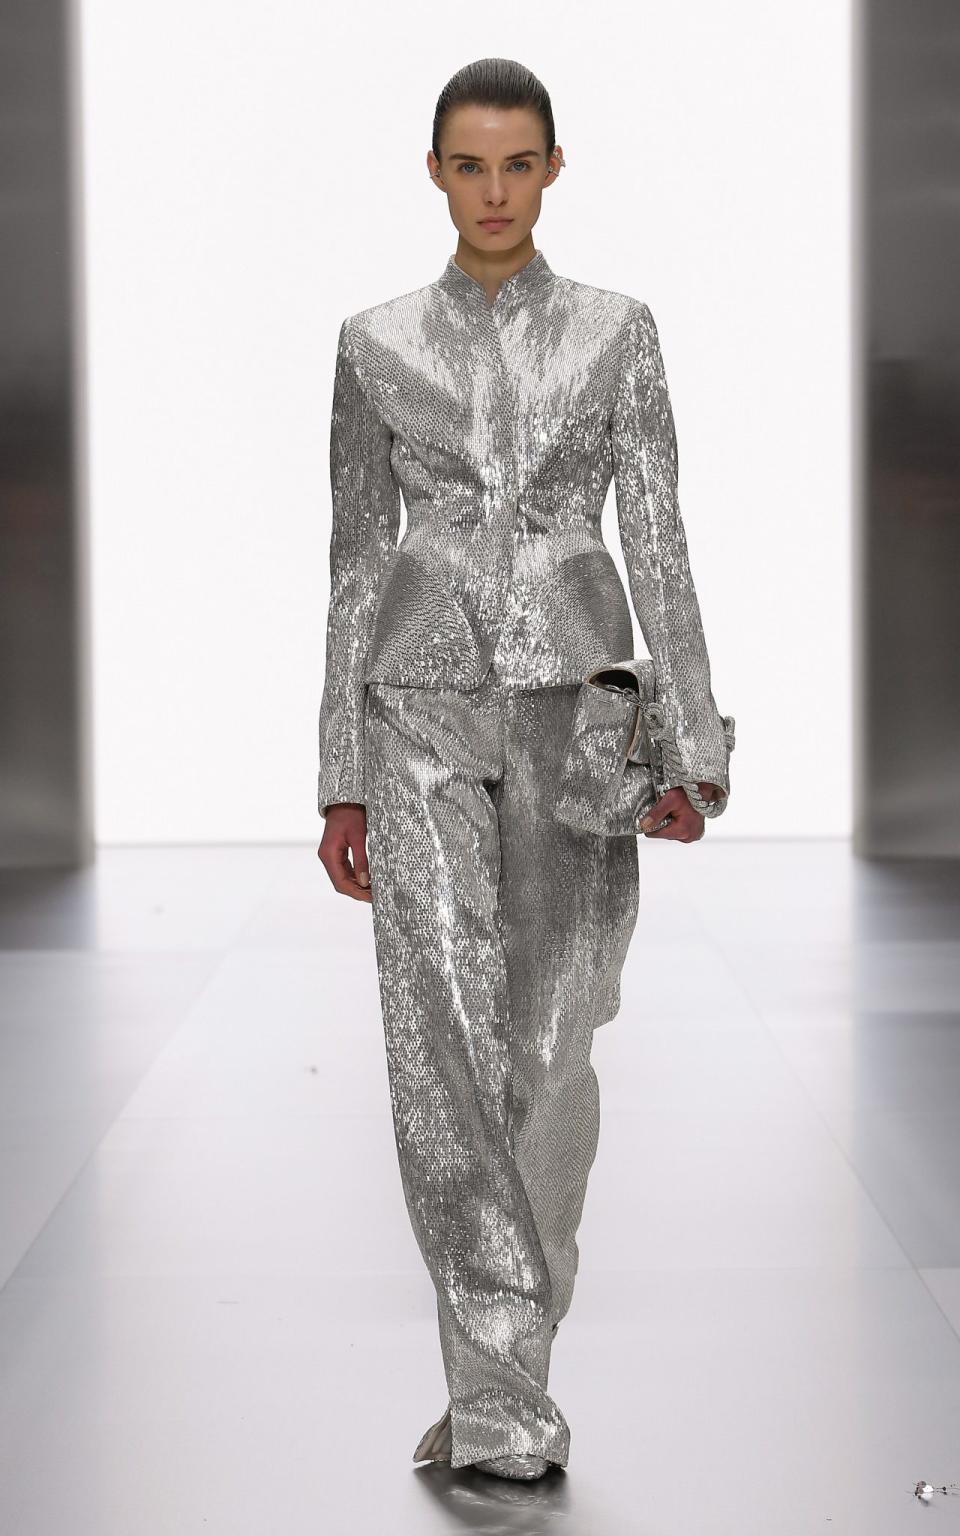 The collection featured several sequined garments